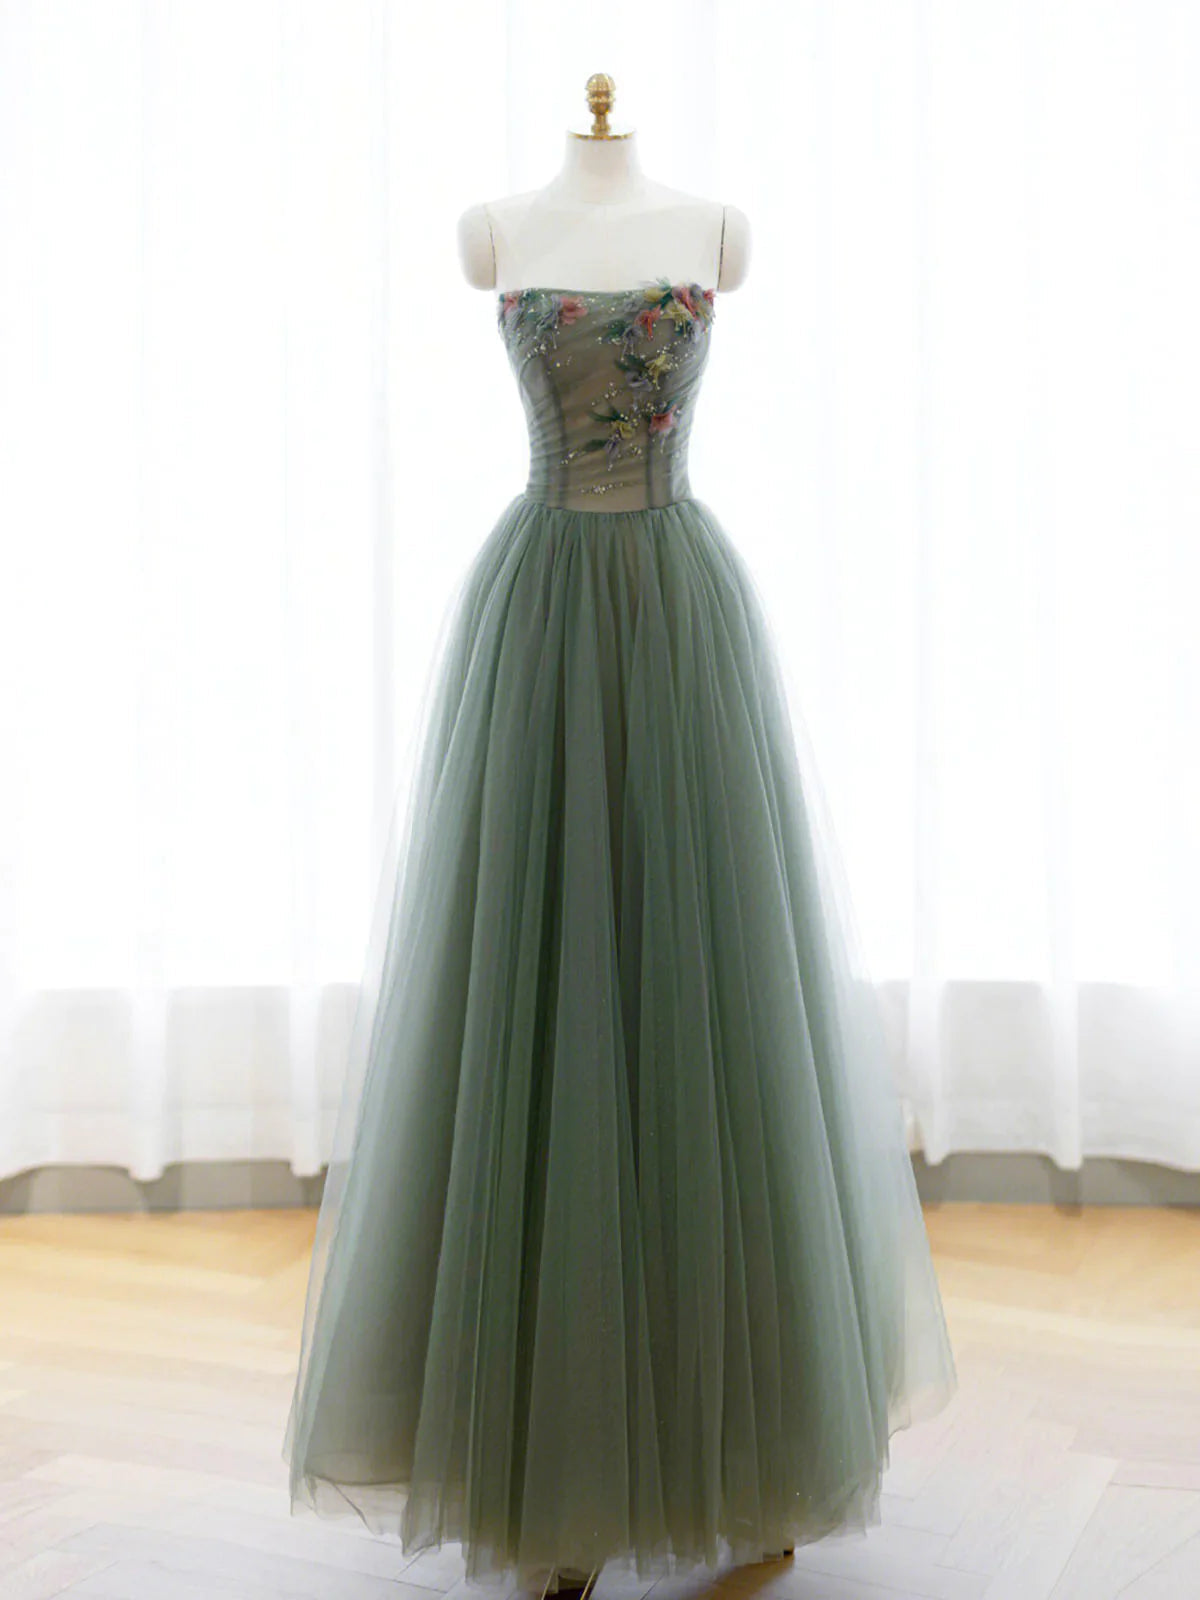 Bridesmaid Dress Sale, Strapless Green Tulle Floral Long Prom Dresses, Green Tulle Floral Formal Evening Dresses